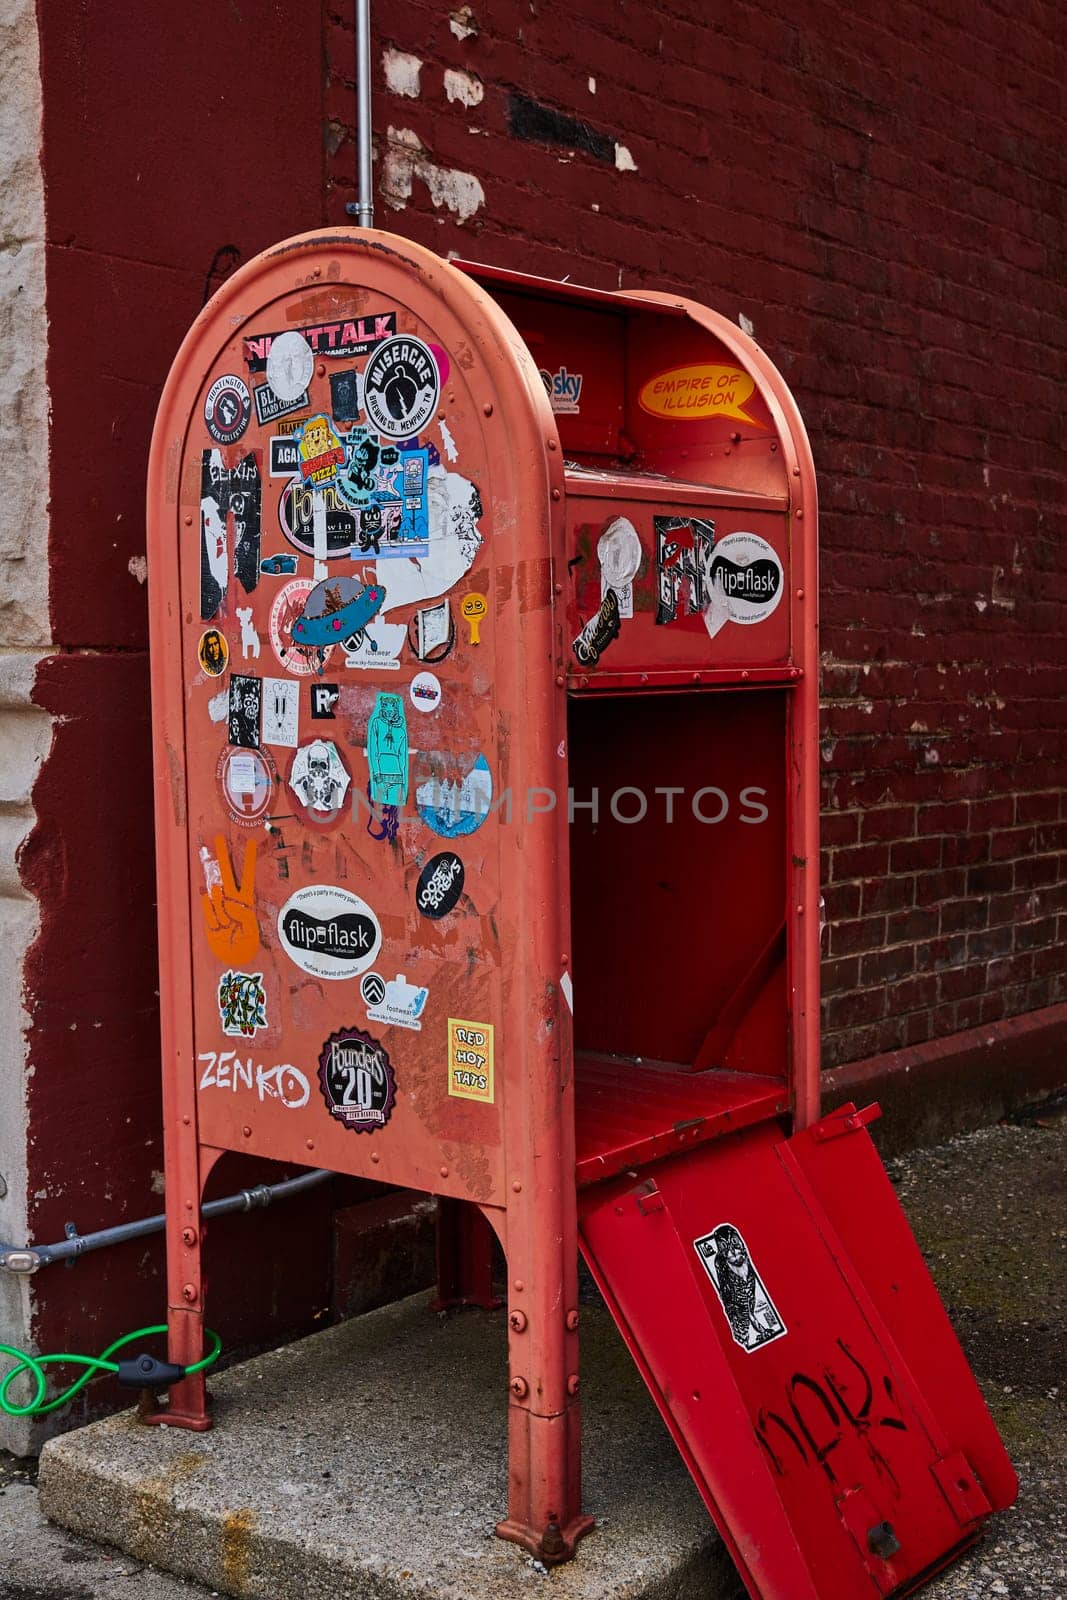 Vintage Red Mailbox Covered in Stickers Against Brick Wall by njproductions